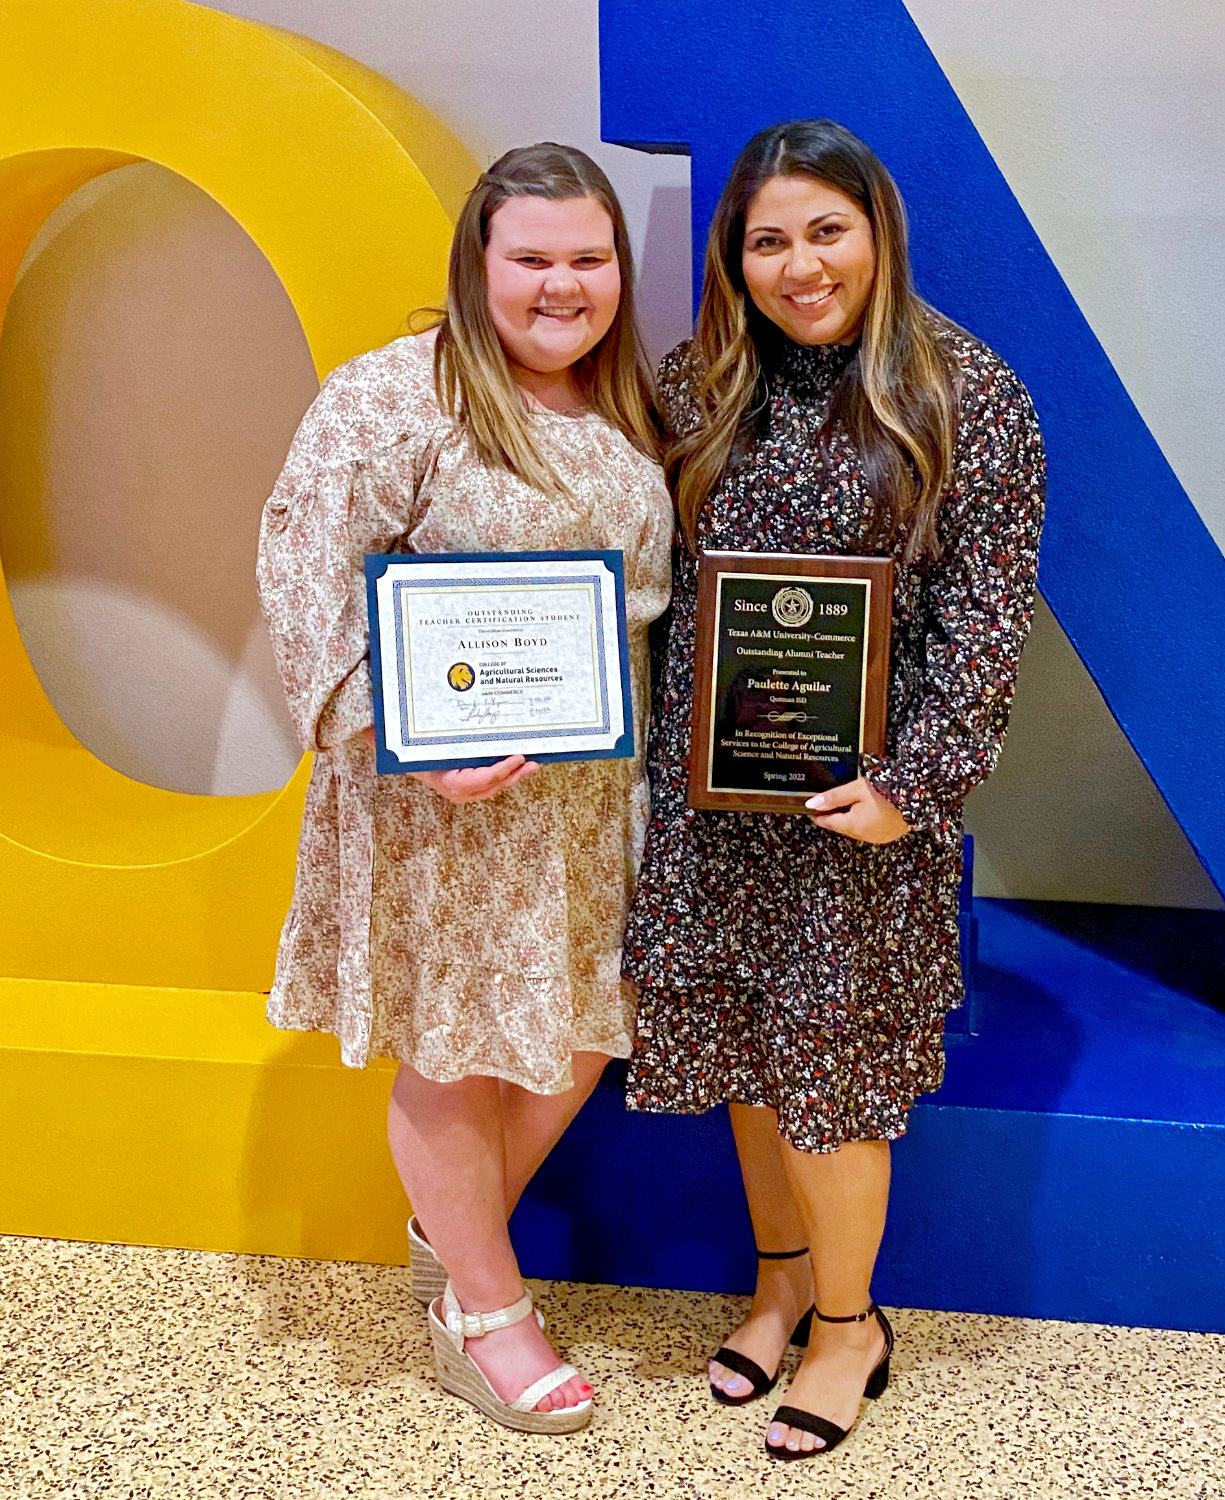 Allison Boyd, left, and Paulette Aguilar were honored by Texas A&M-Commerce.